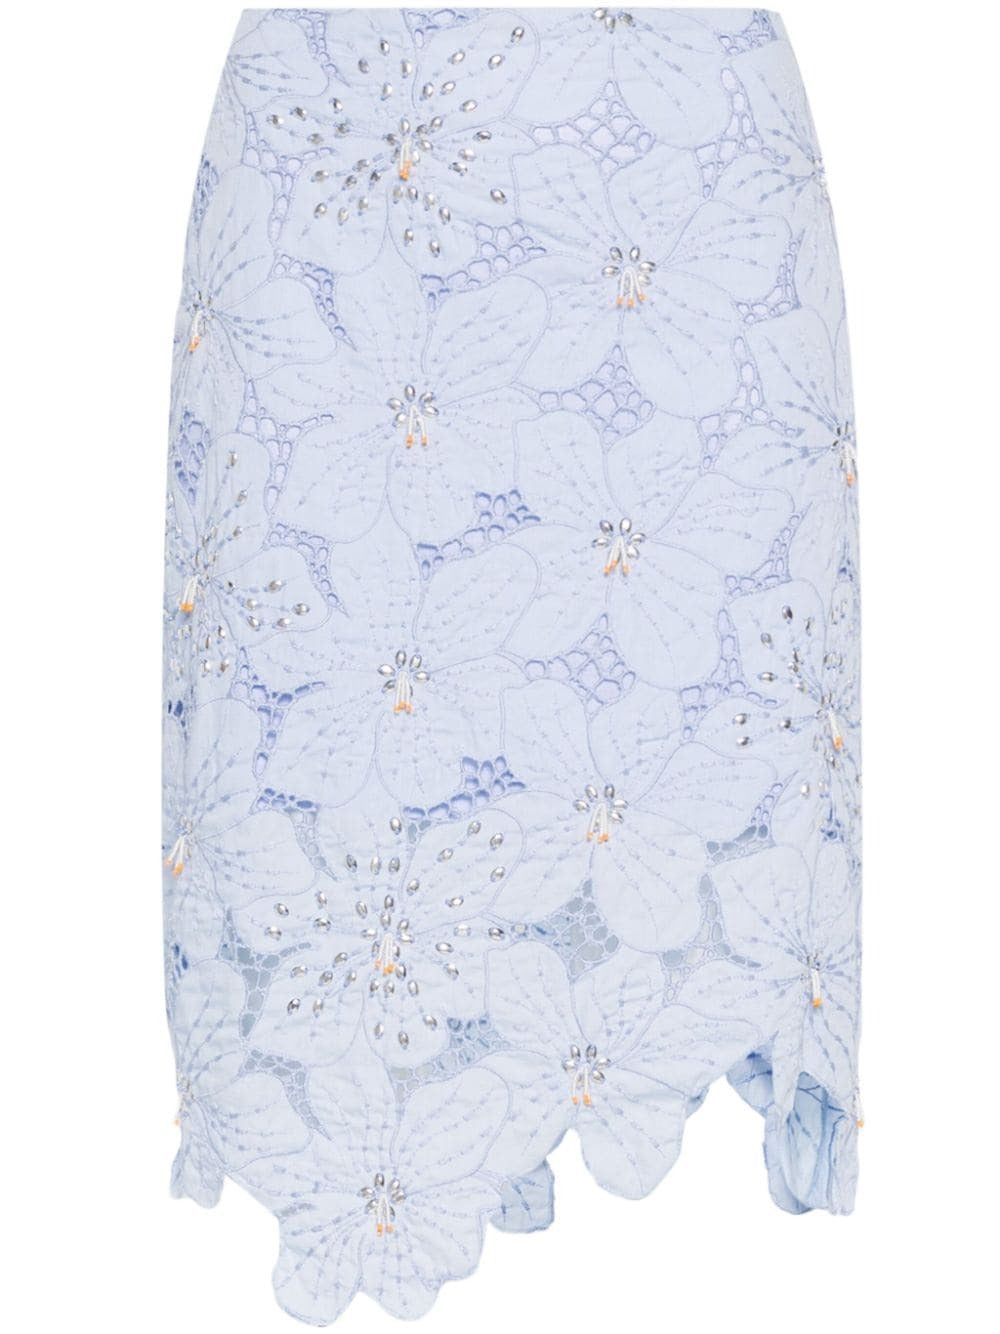 WALES BONNER-CONSTELLATION LACE SKIRT-